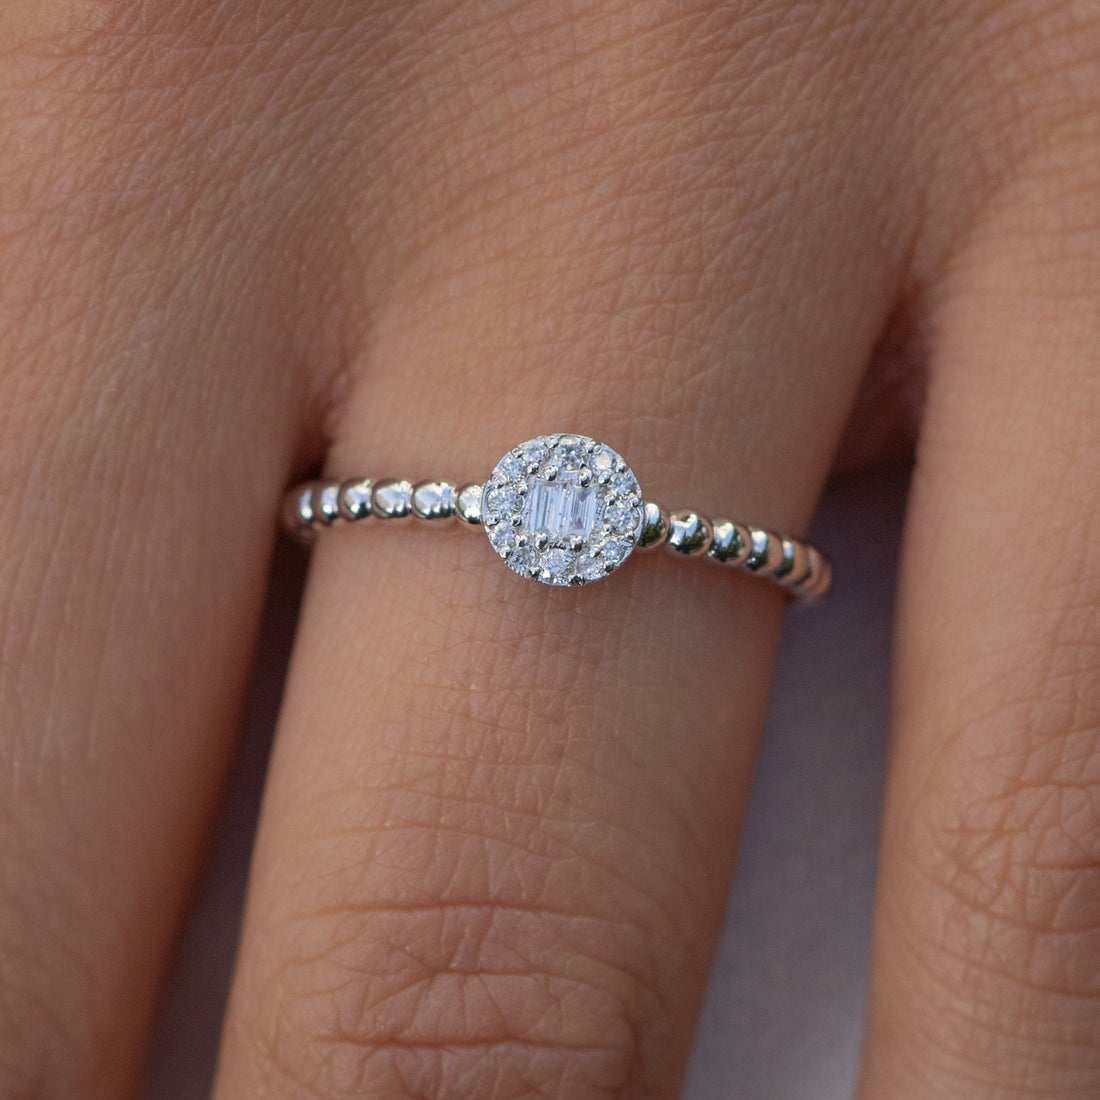  14K White Gold Baguette and Round Diamond Ring Shop online from Artisan Brands